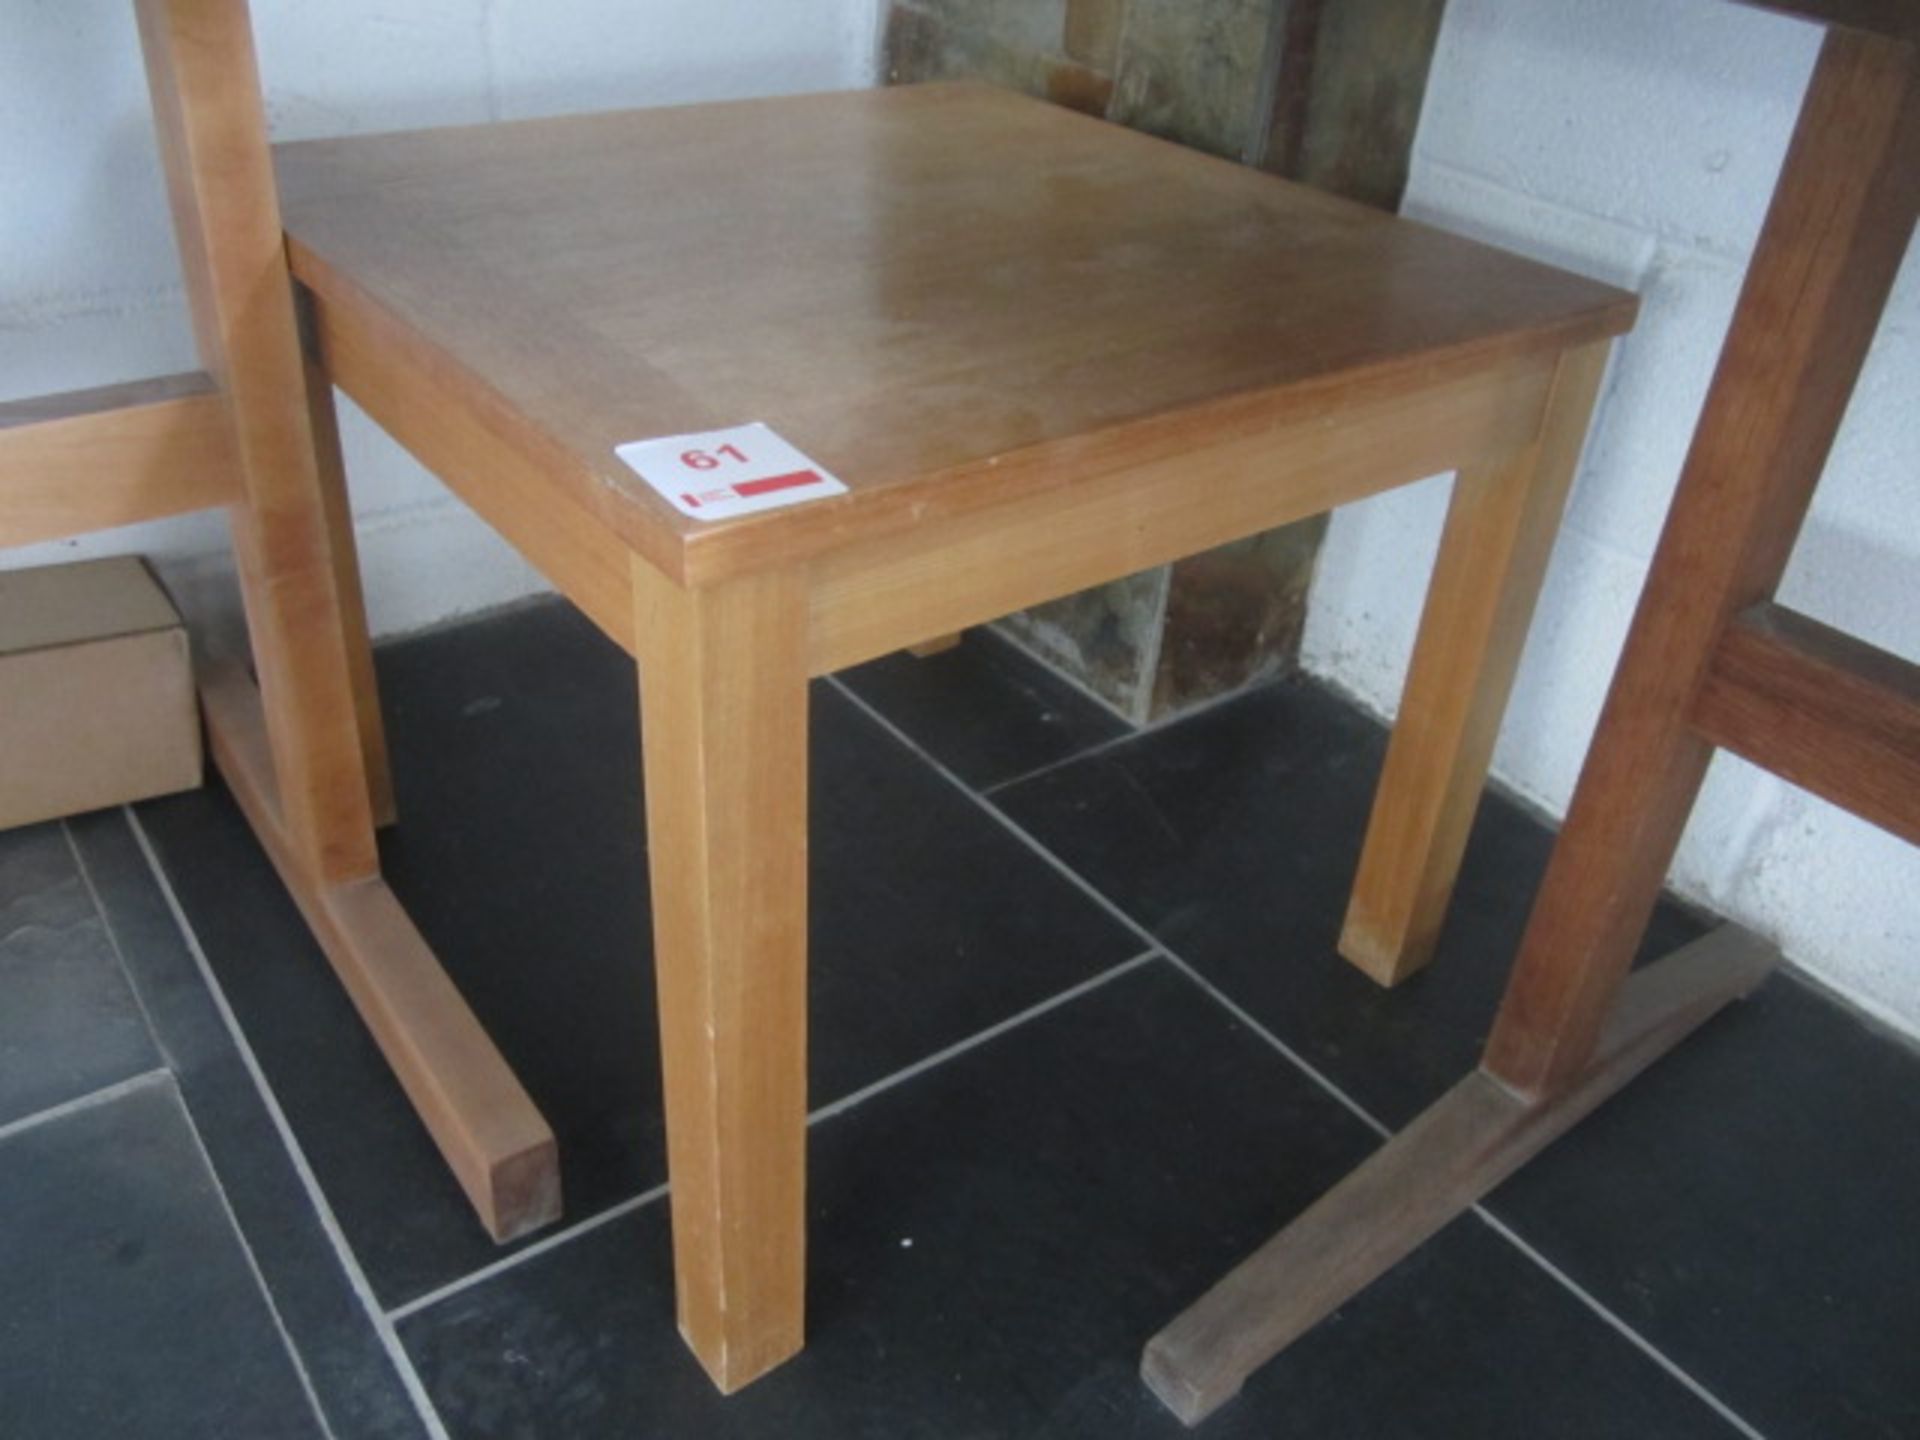 Wood effect table, approx. size 610mm x 610mm